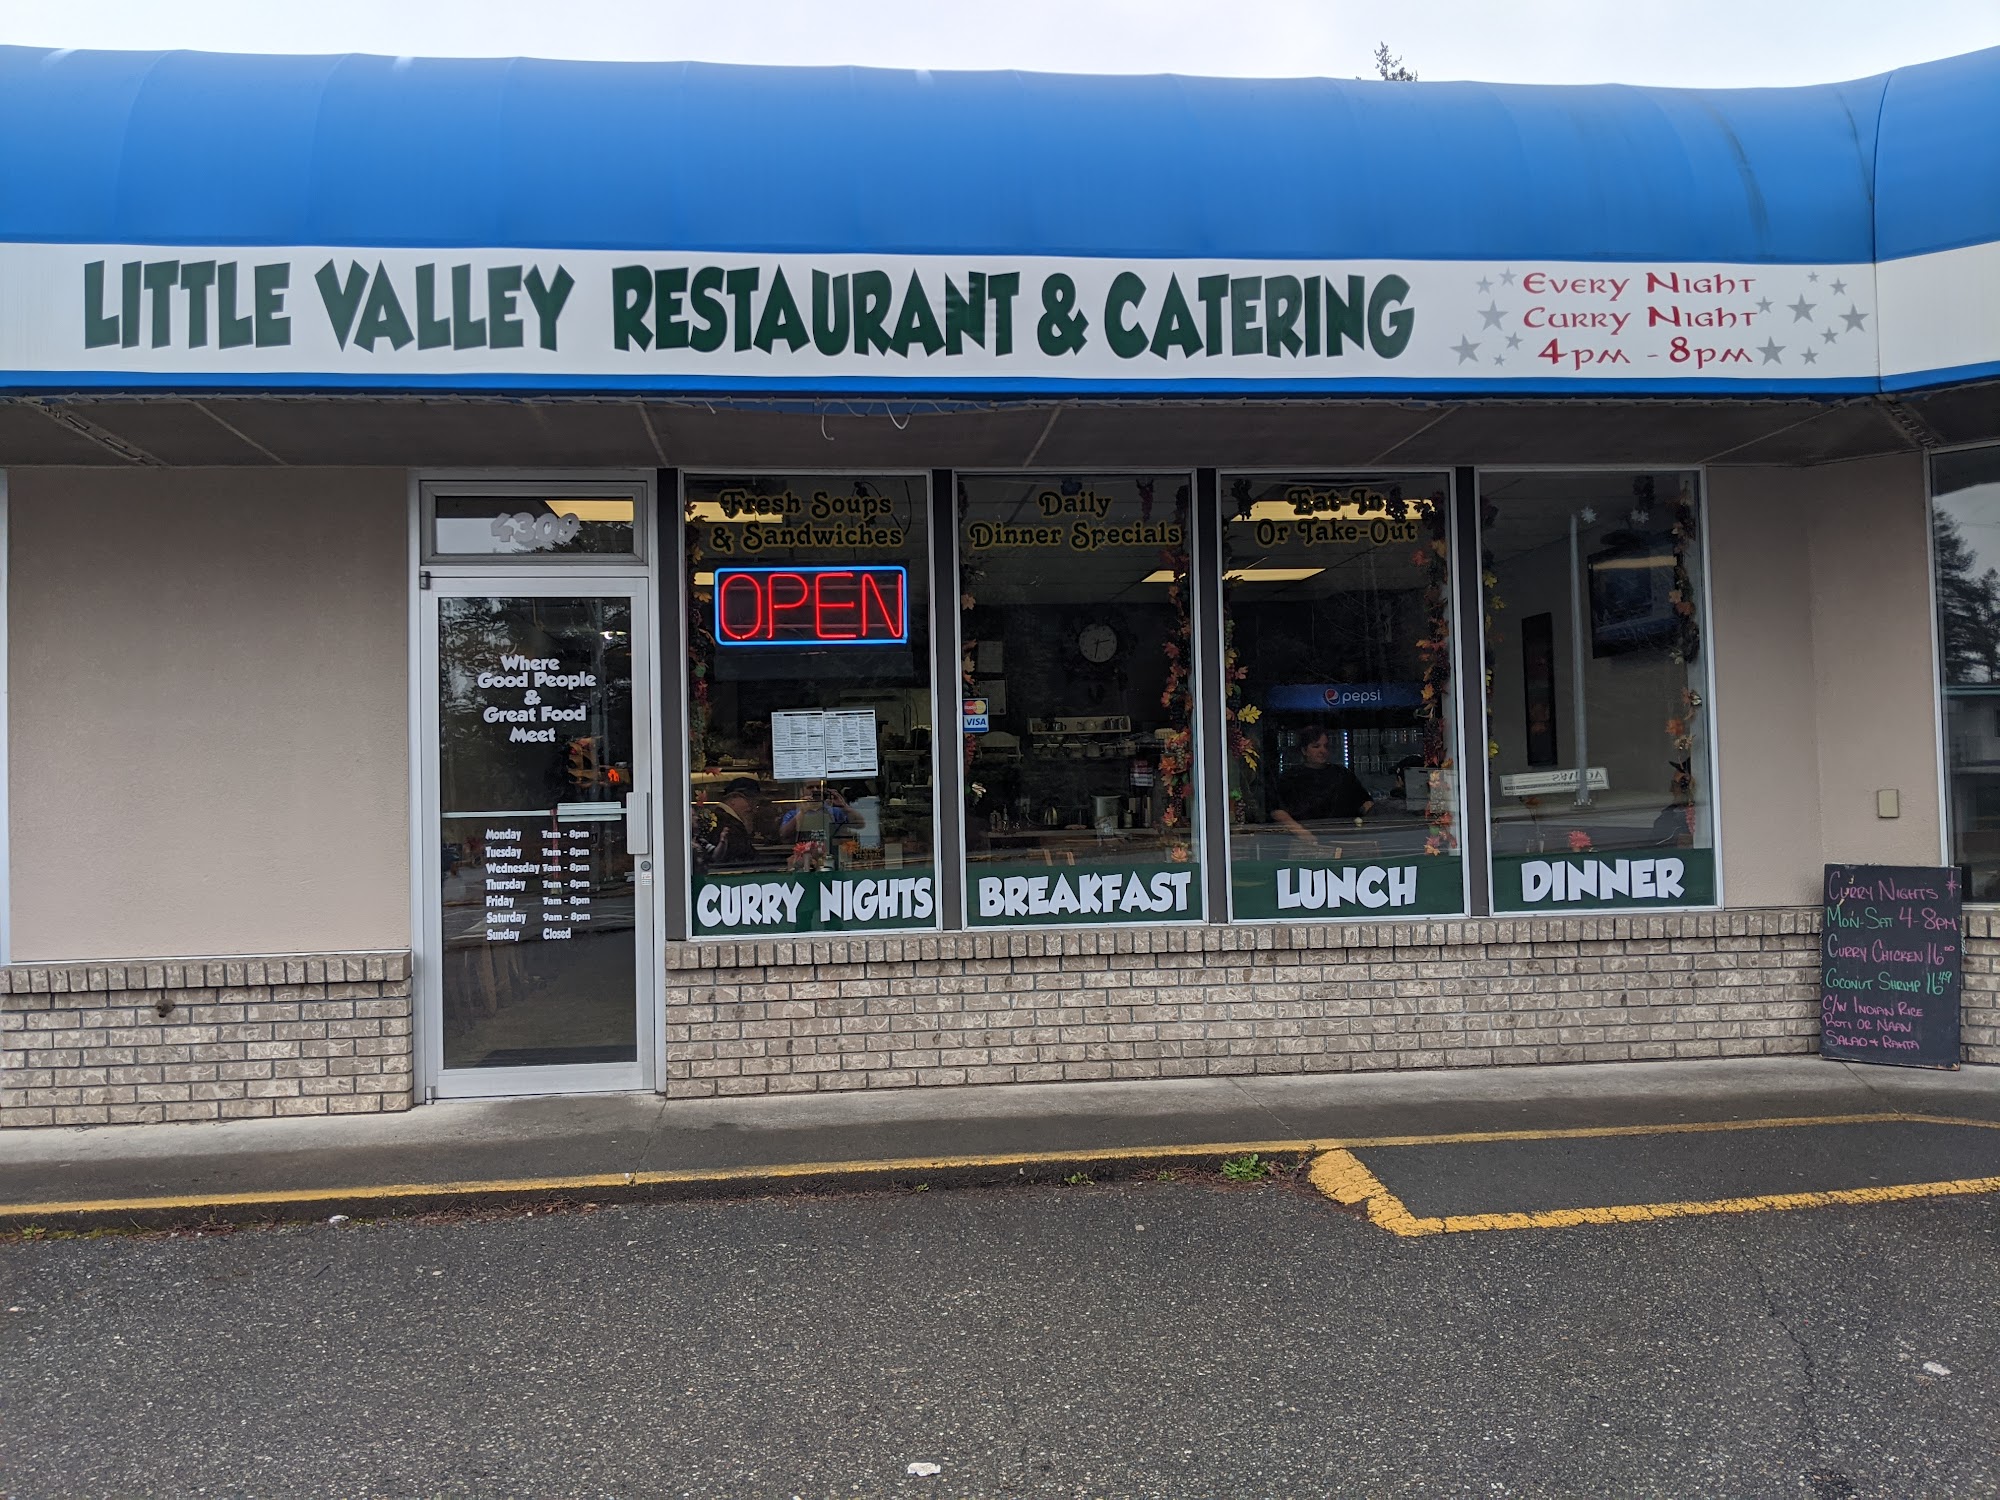 Little Valley Restaurant & catering curry nights